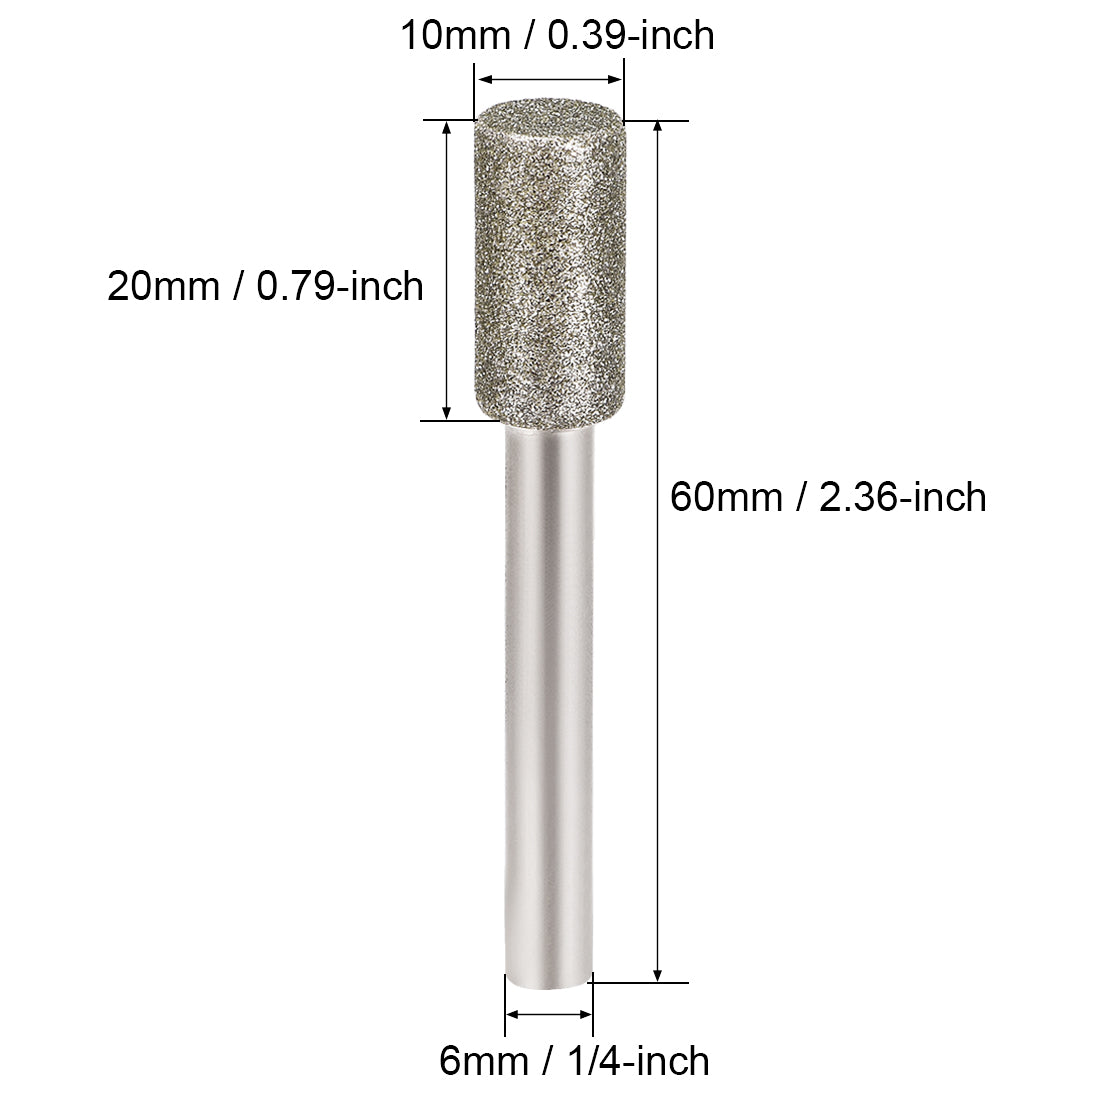 Uxcell Uxcell Diamond Burrs Grinding Drill Bits for Carving Rotary Tool 1/4-Inch Shank 6mm Cylindrical 150 Grit 10 Pcs